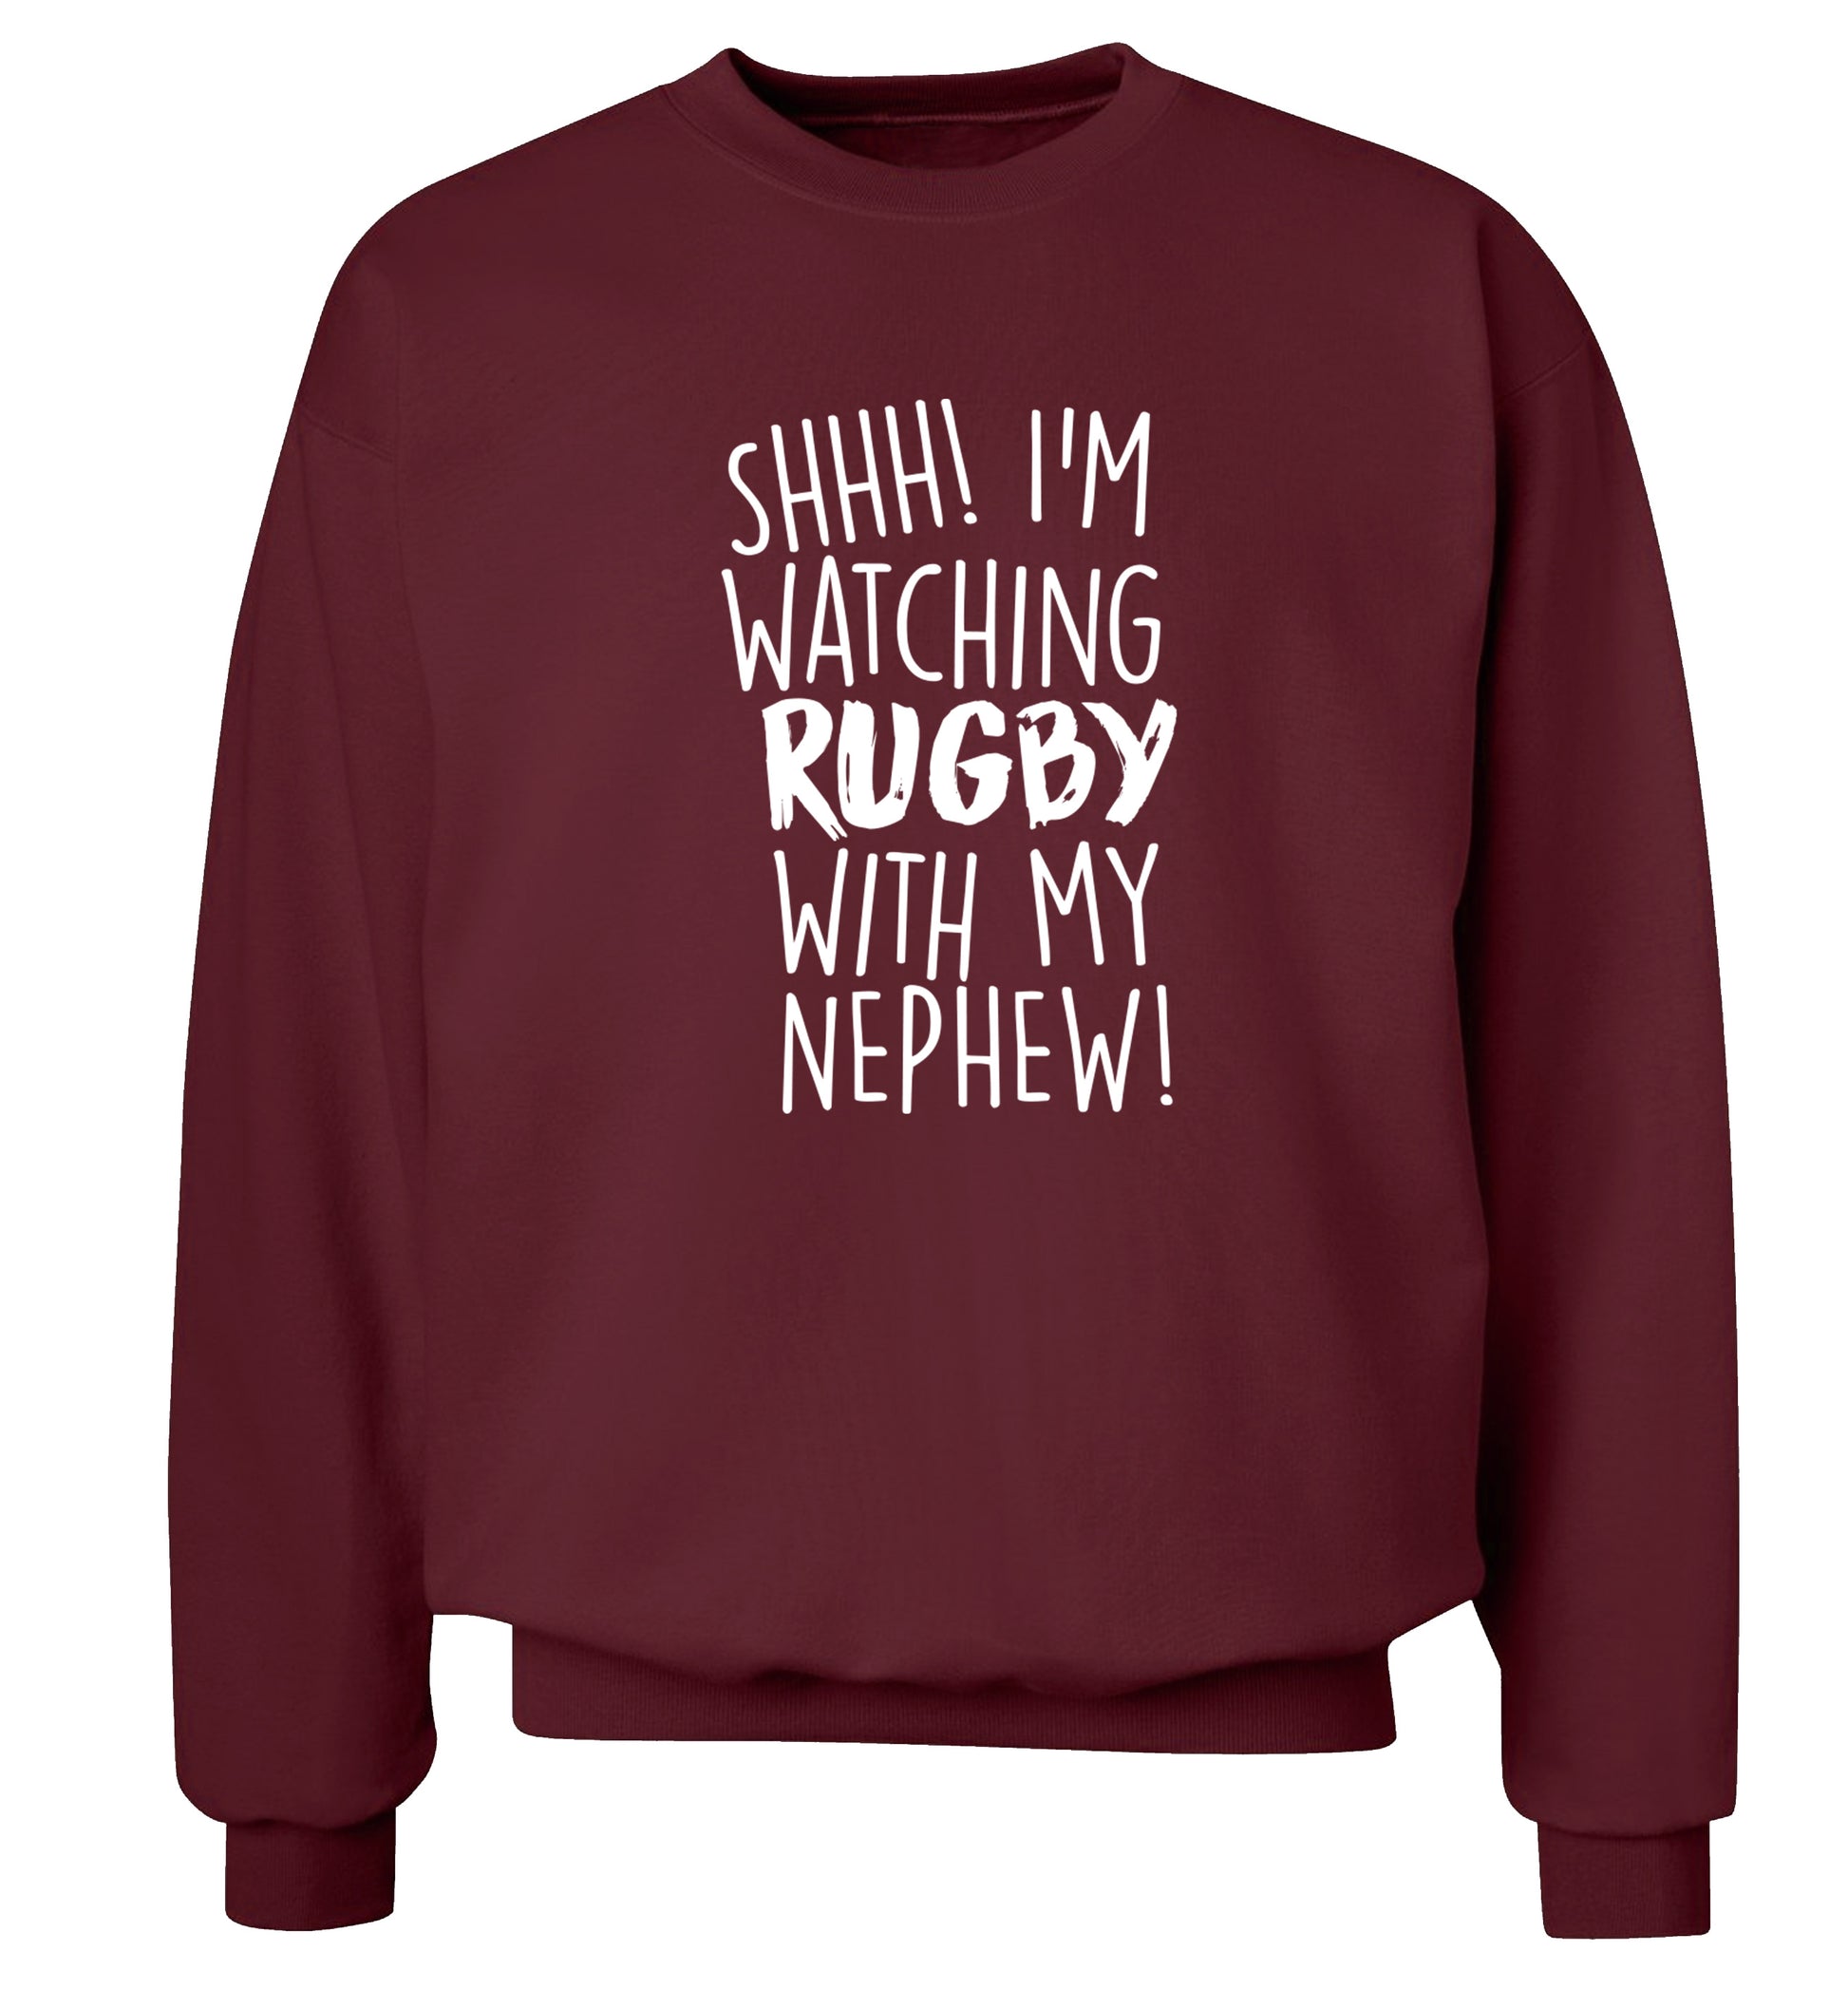 Shh.. I'm watching rugby with my nephew Adult's unisex maroon Sweater 2XL